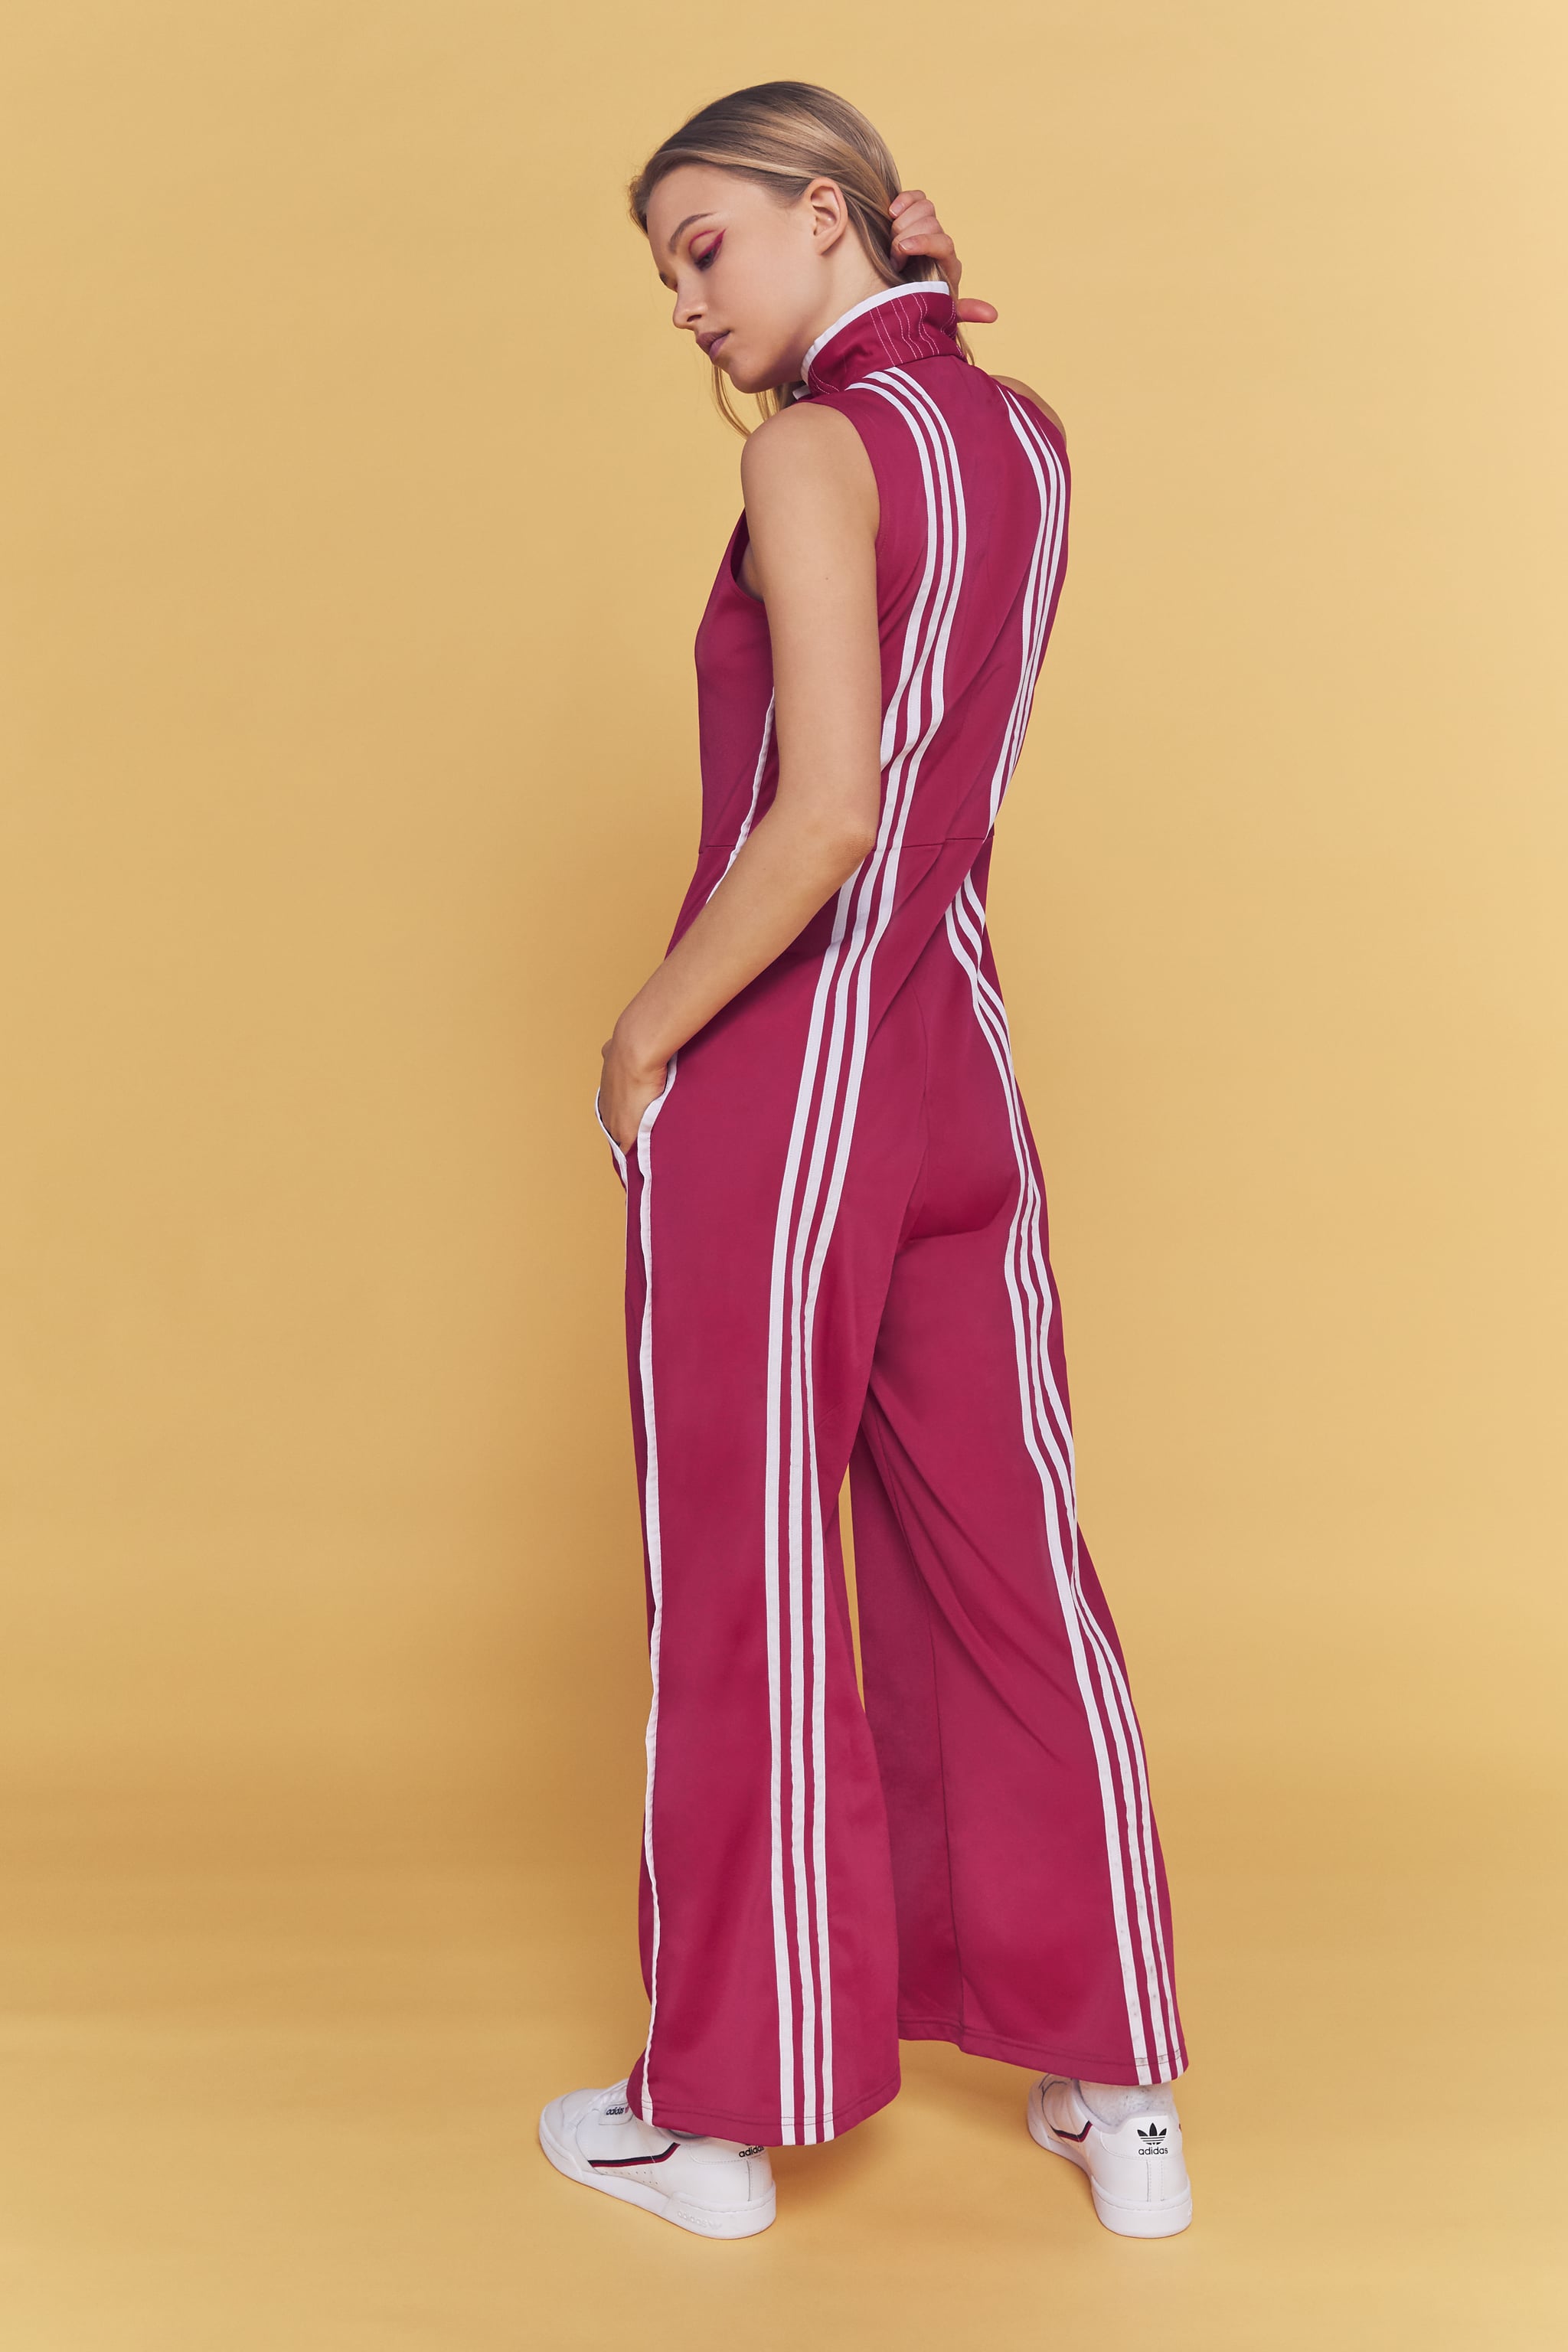 Adidas Originals By Ji Won Choi 3-Stripe Snap Button Jumpsuit | Kendall Jenner's Adidas Tracksuit Just Dropped at Urban Outfitters, So You Know What to Do POPSUGAR Fashion Photo 6